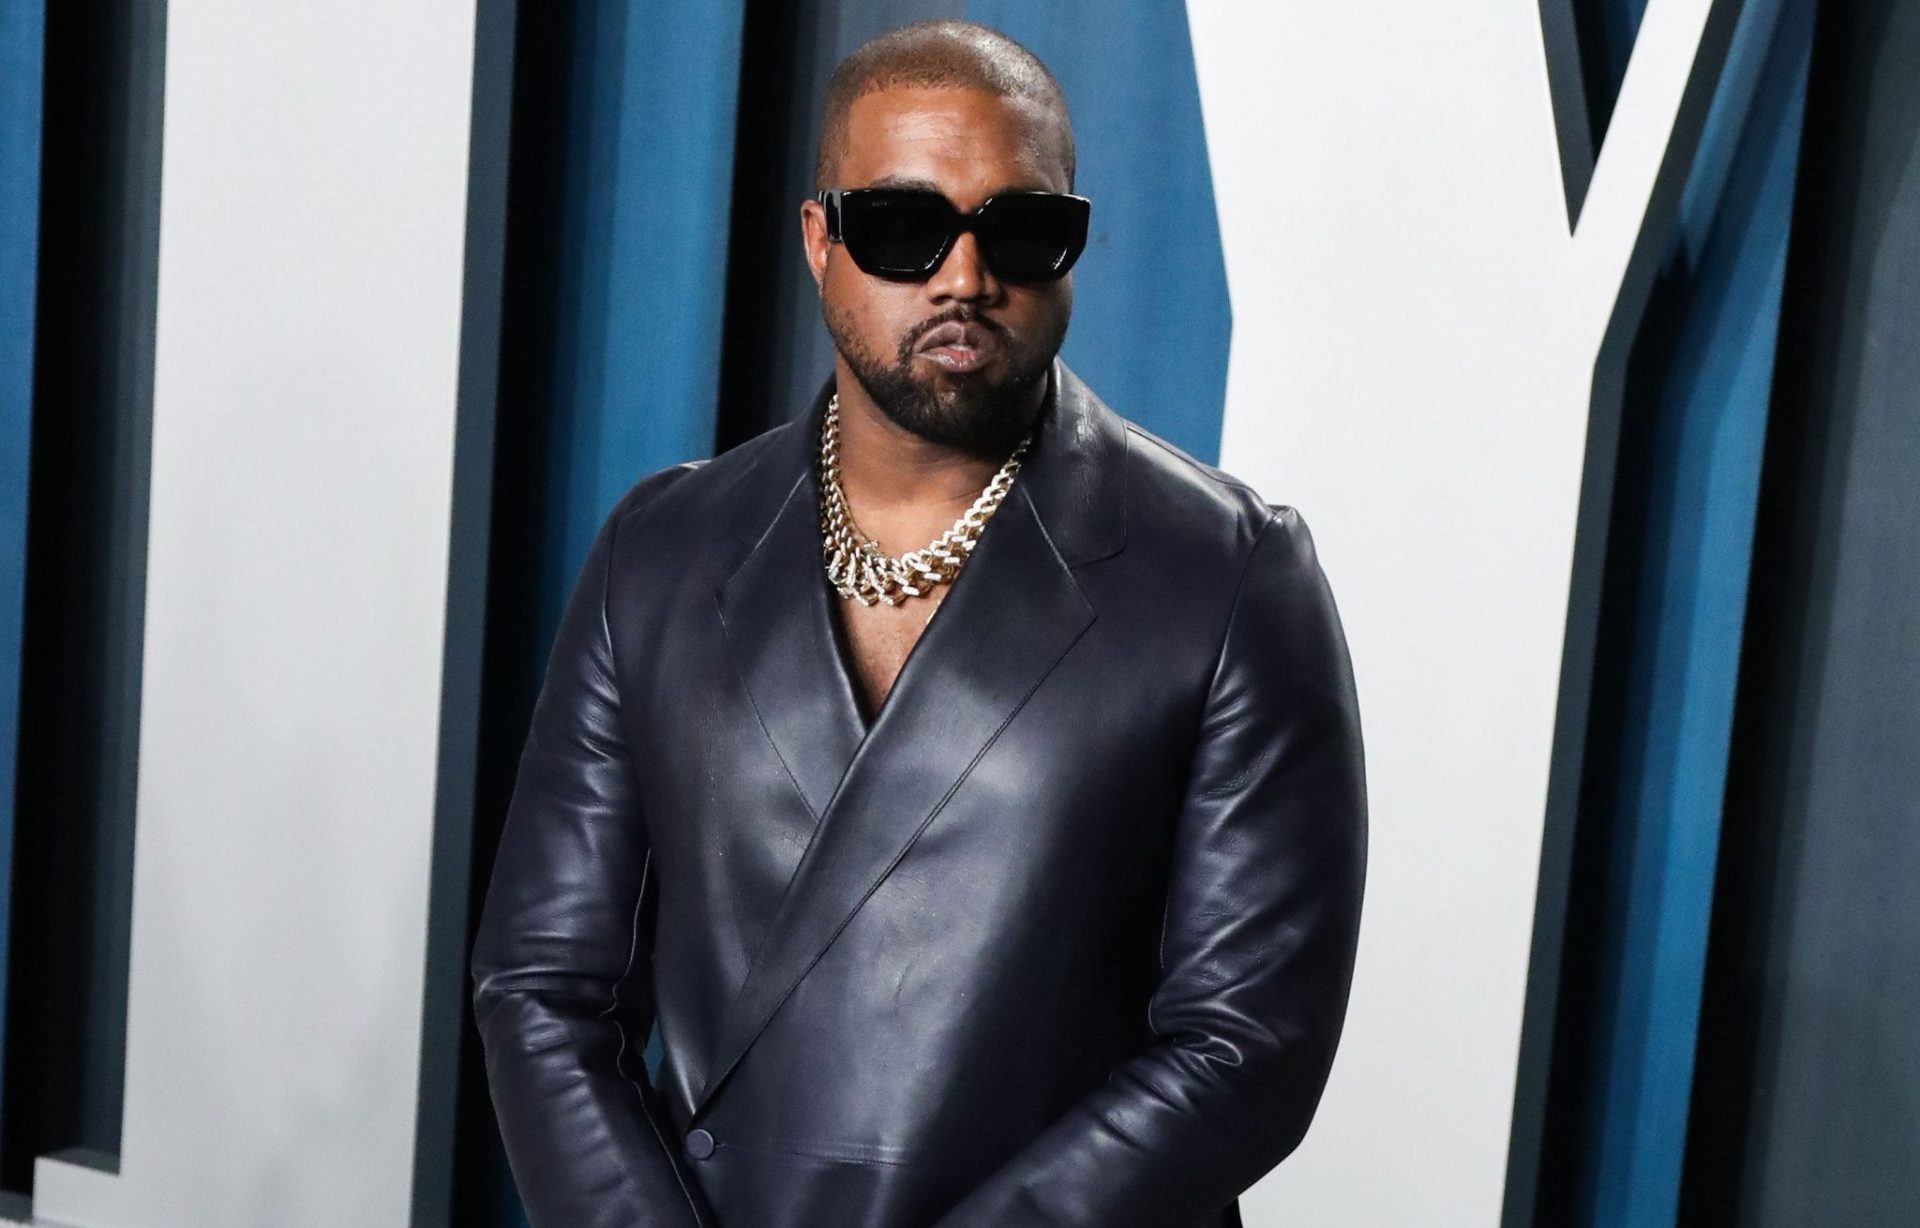 Why Gap is suing Kanye West for $2M